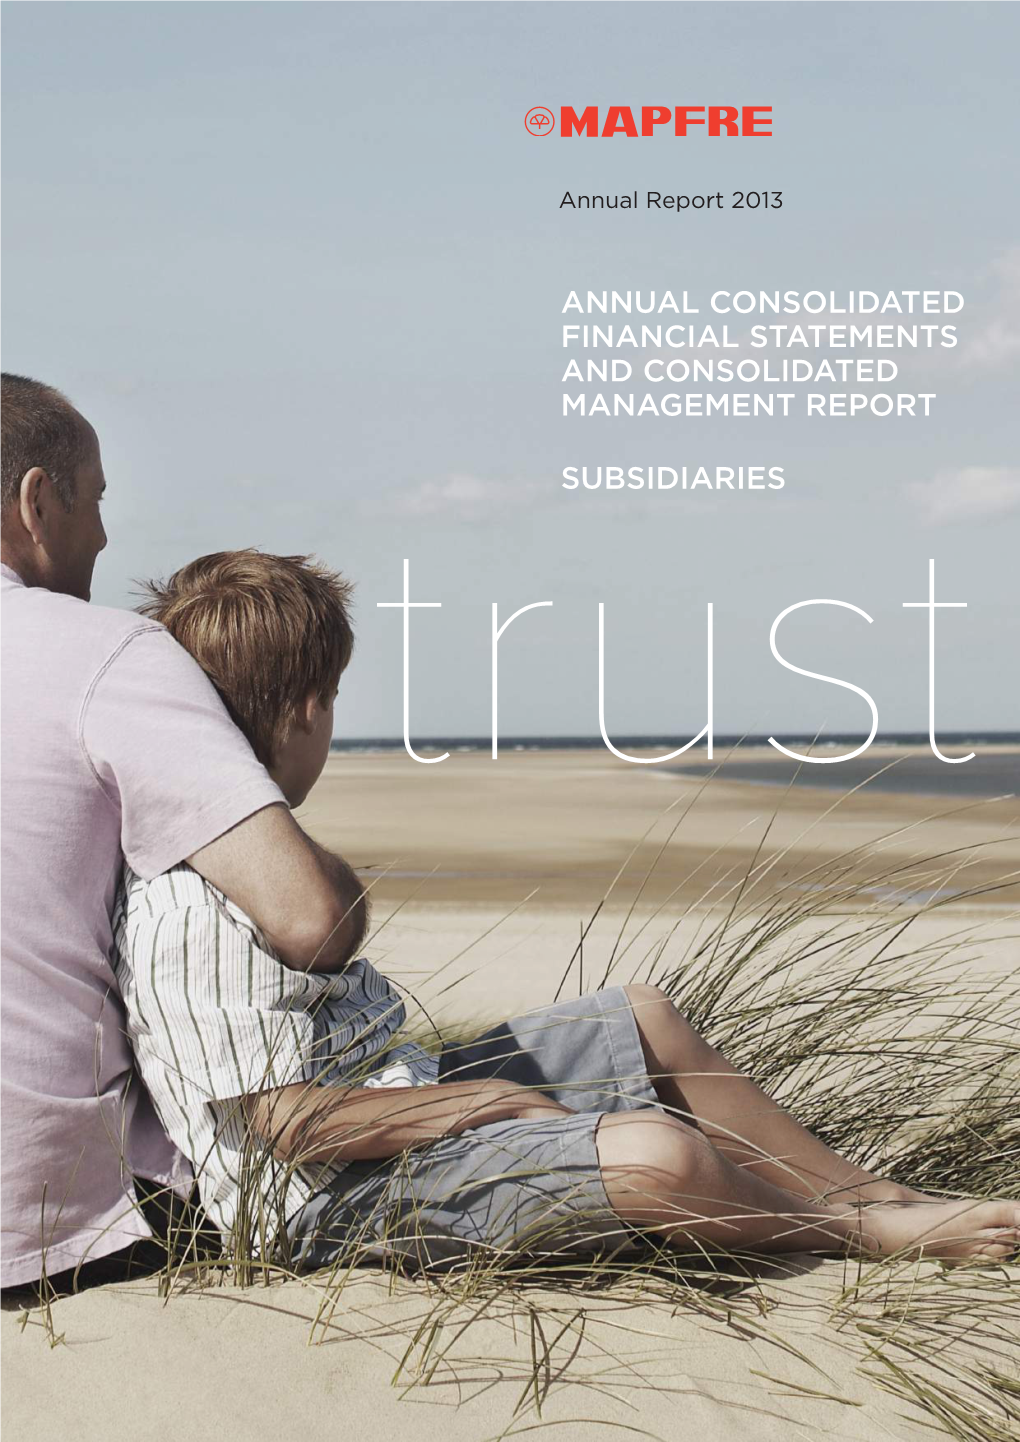 Annual Consolidated Financial Statements and Consolidated Management Report Subsidiaries